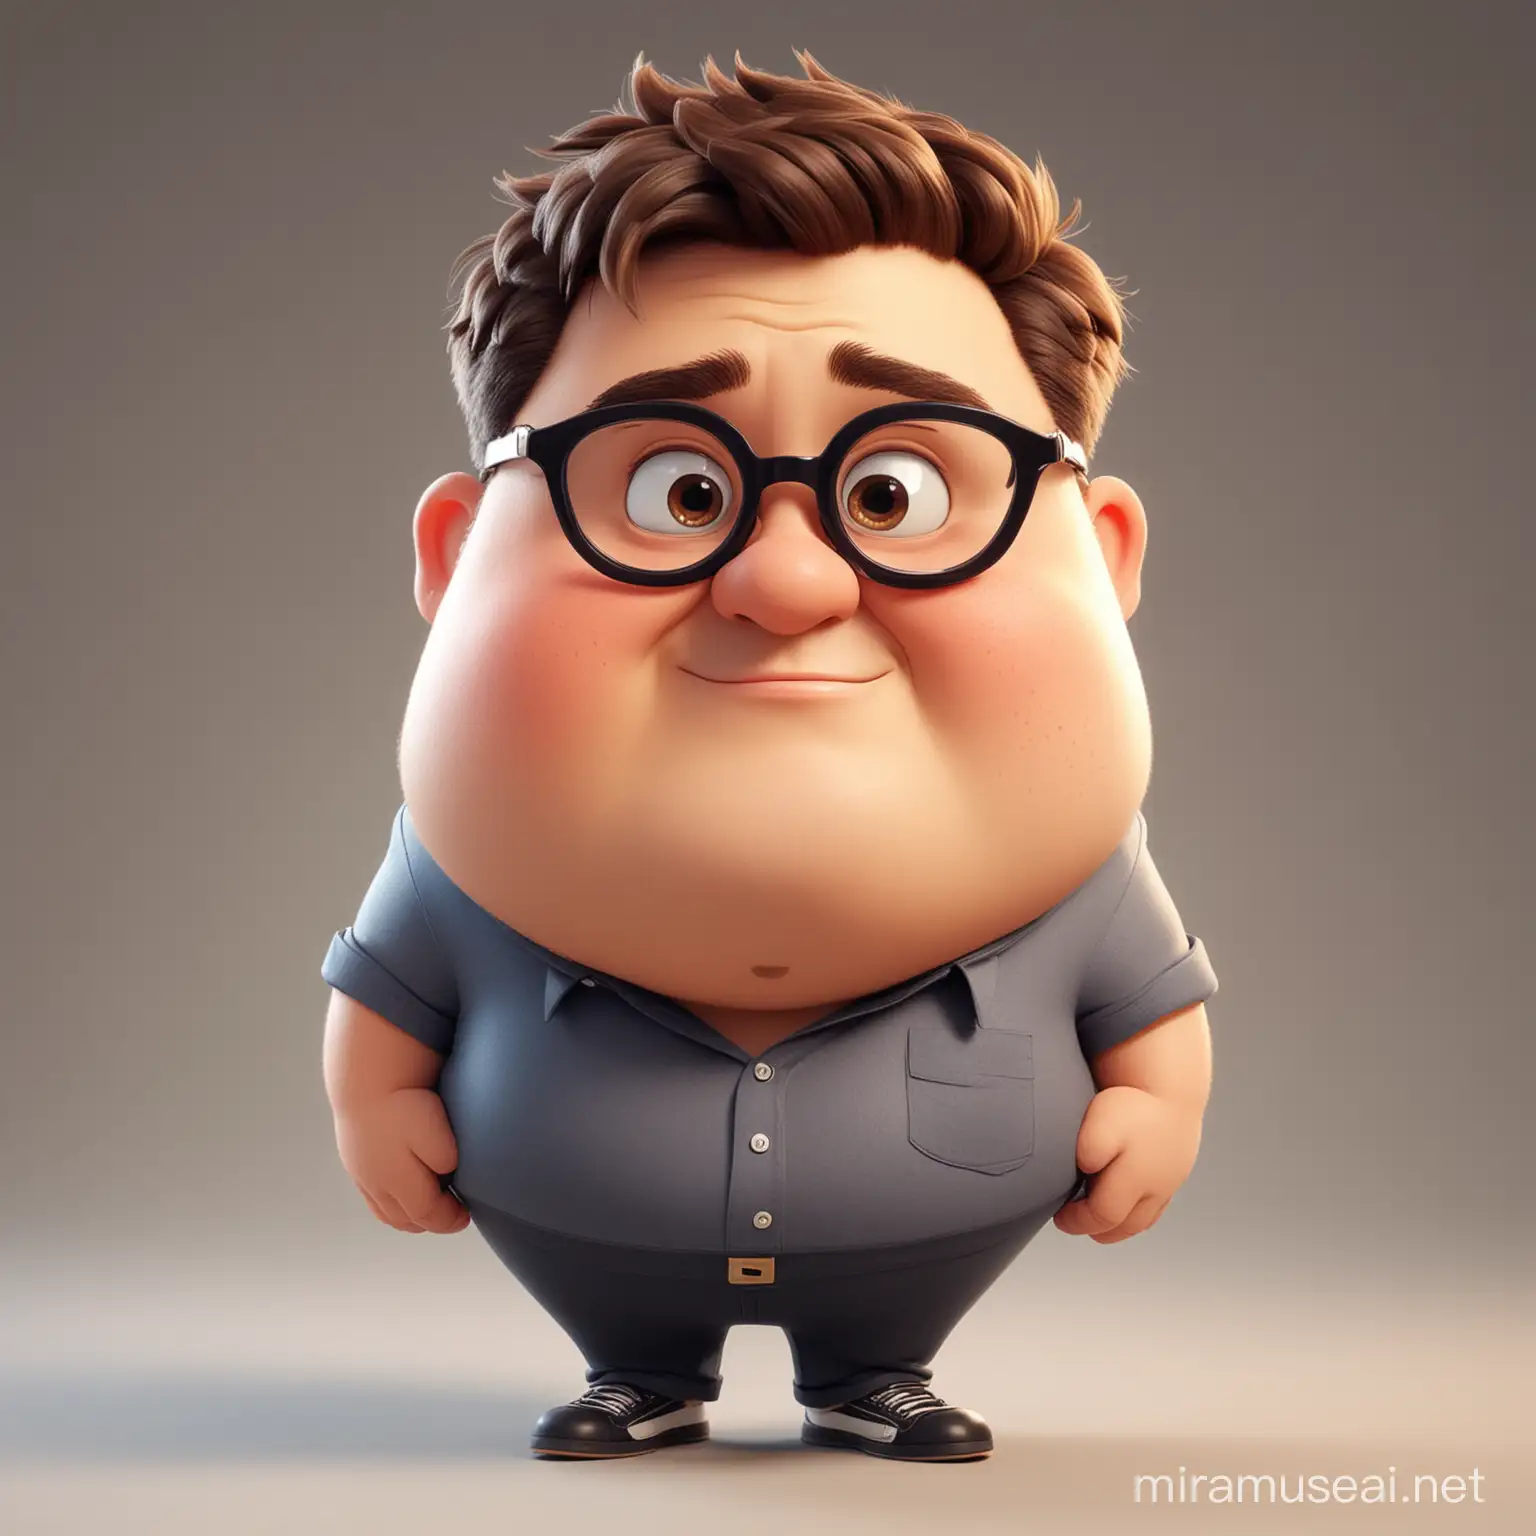 Cheerful Cartoon Character Short Chubby Guy with Glasses